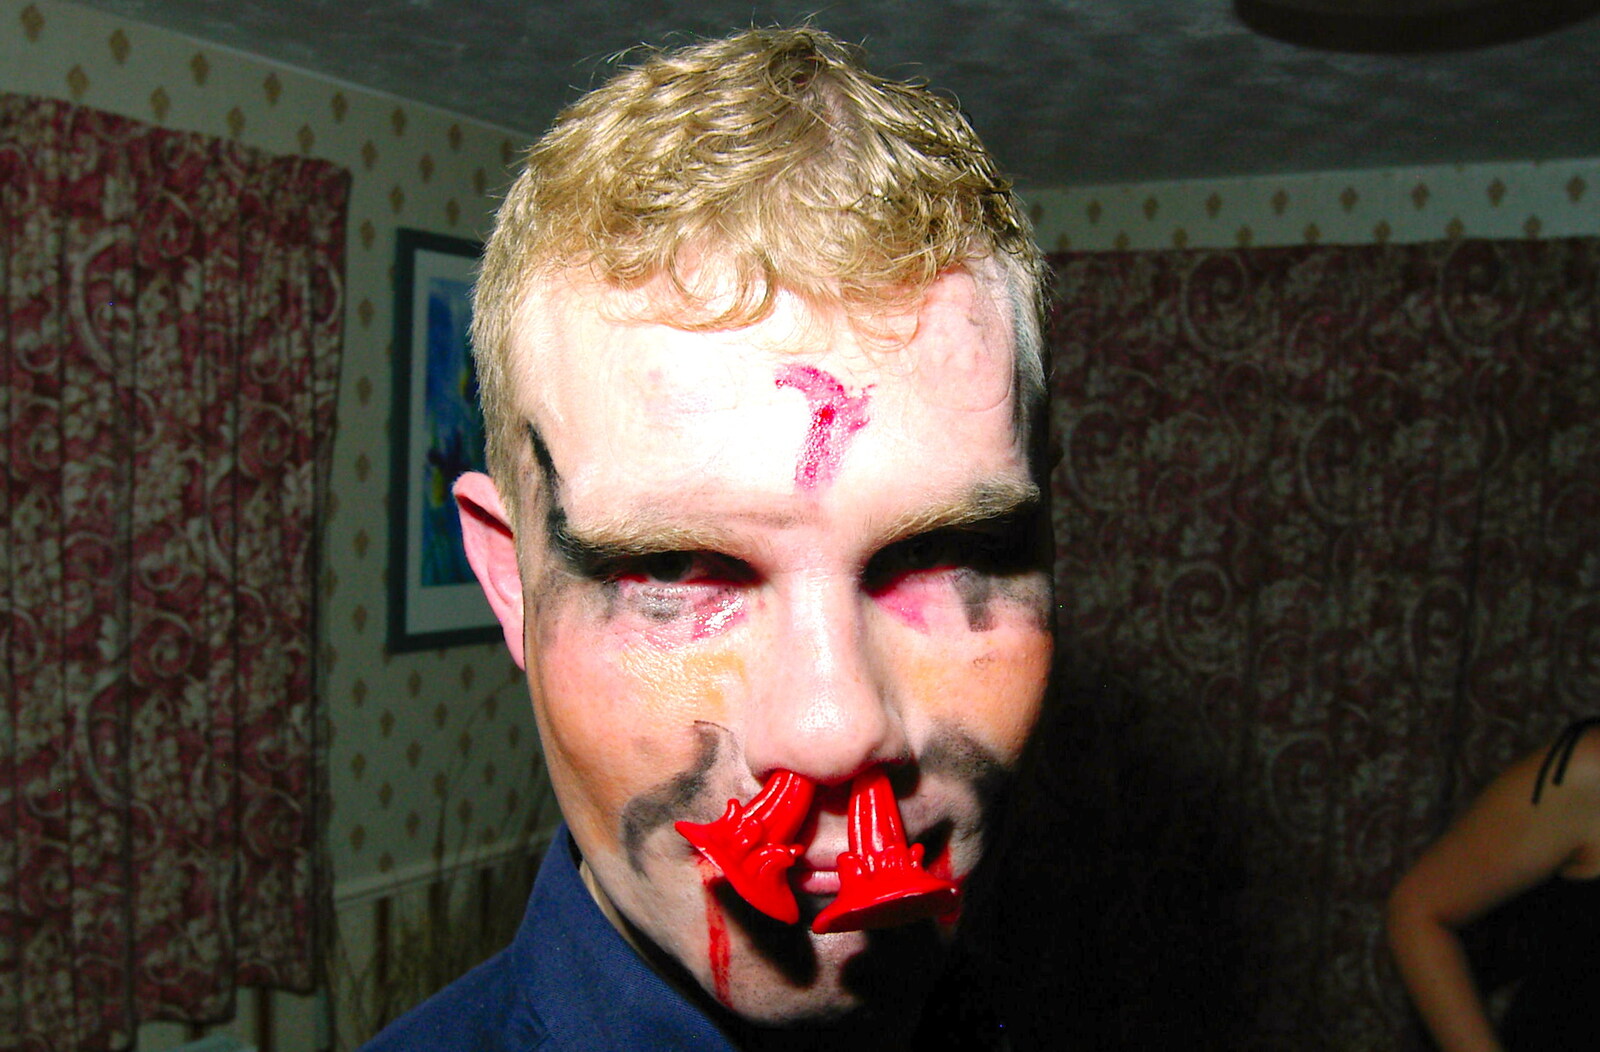 Mikey-P sticks his horns up his nose from Jen's Hallowe'en Party and Sazzle's Leaving Do, Mission Road, Diss - 28th October 2005